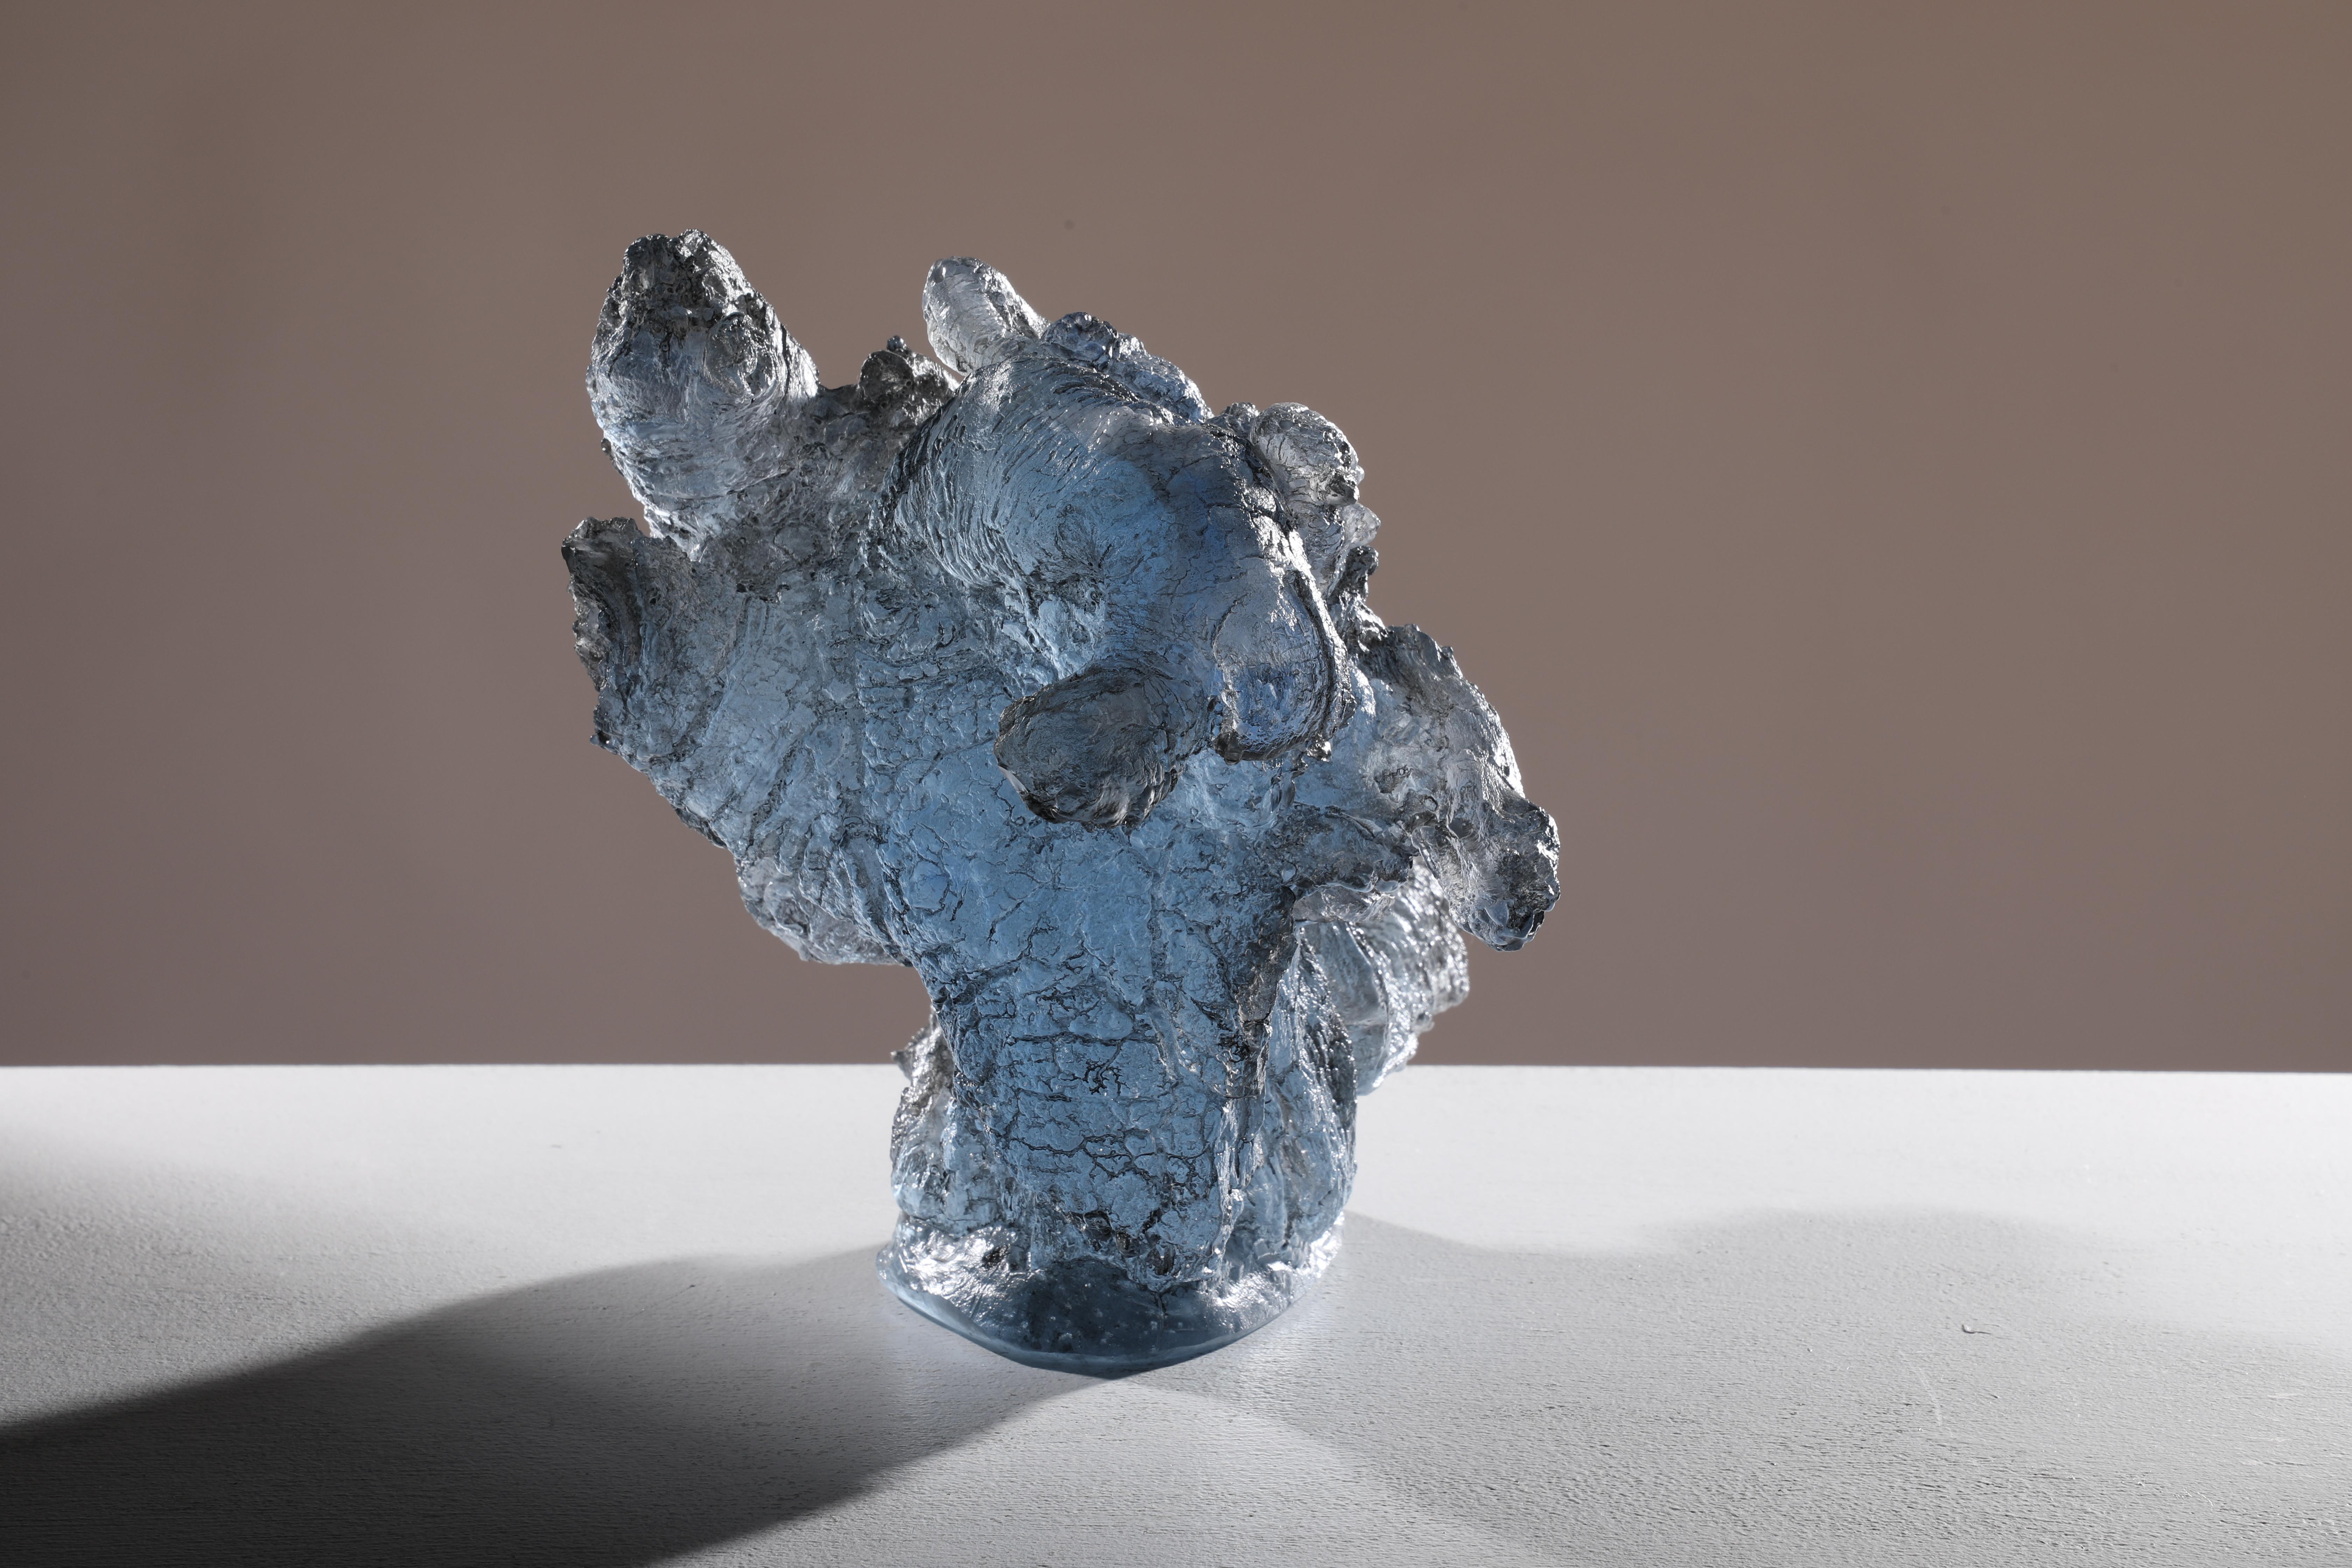 'Ulu Oti' is a contemporary cast glass sculpture by David Ruth from the Chill Project Series. This sculpture is made from soda glass that was then mixed with cobalt and copper to create the light blue color. The piece is initially derived from a